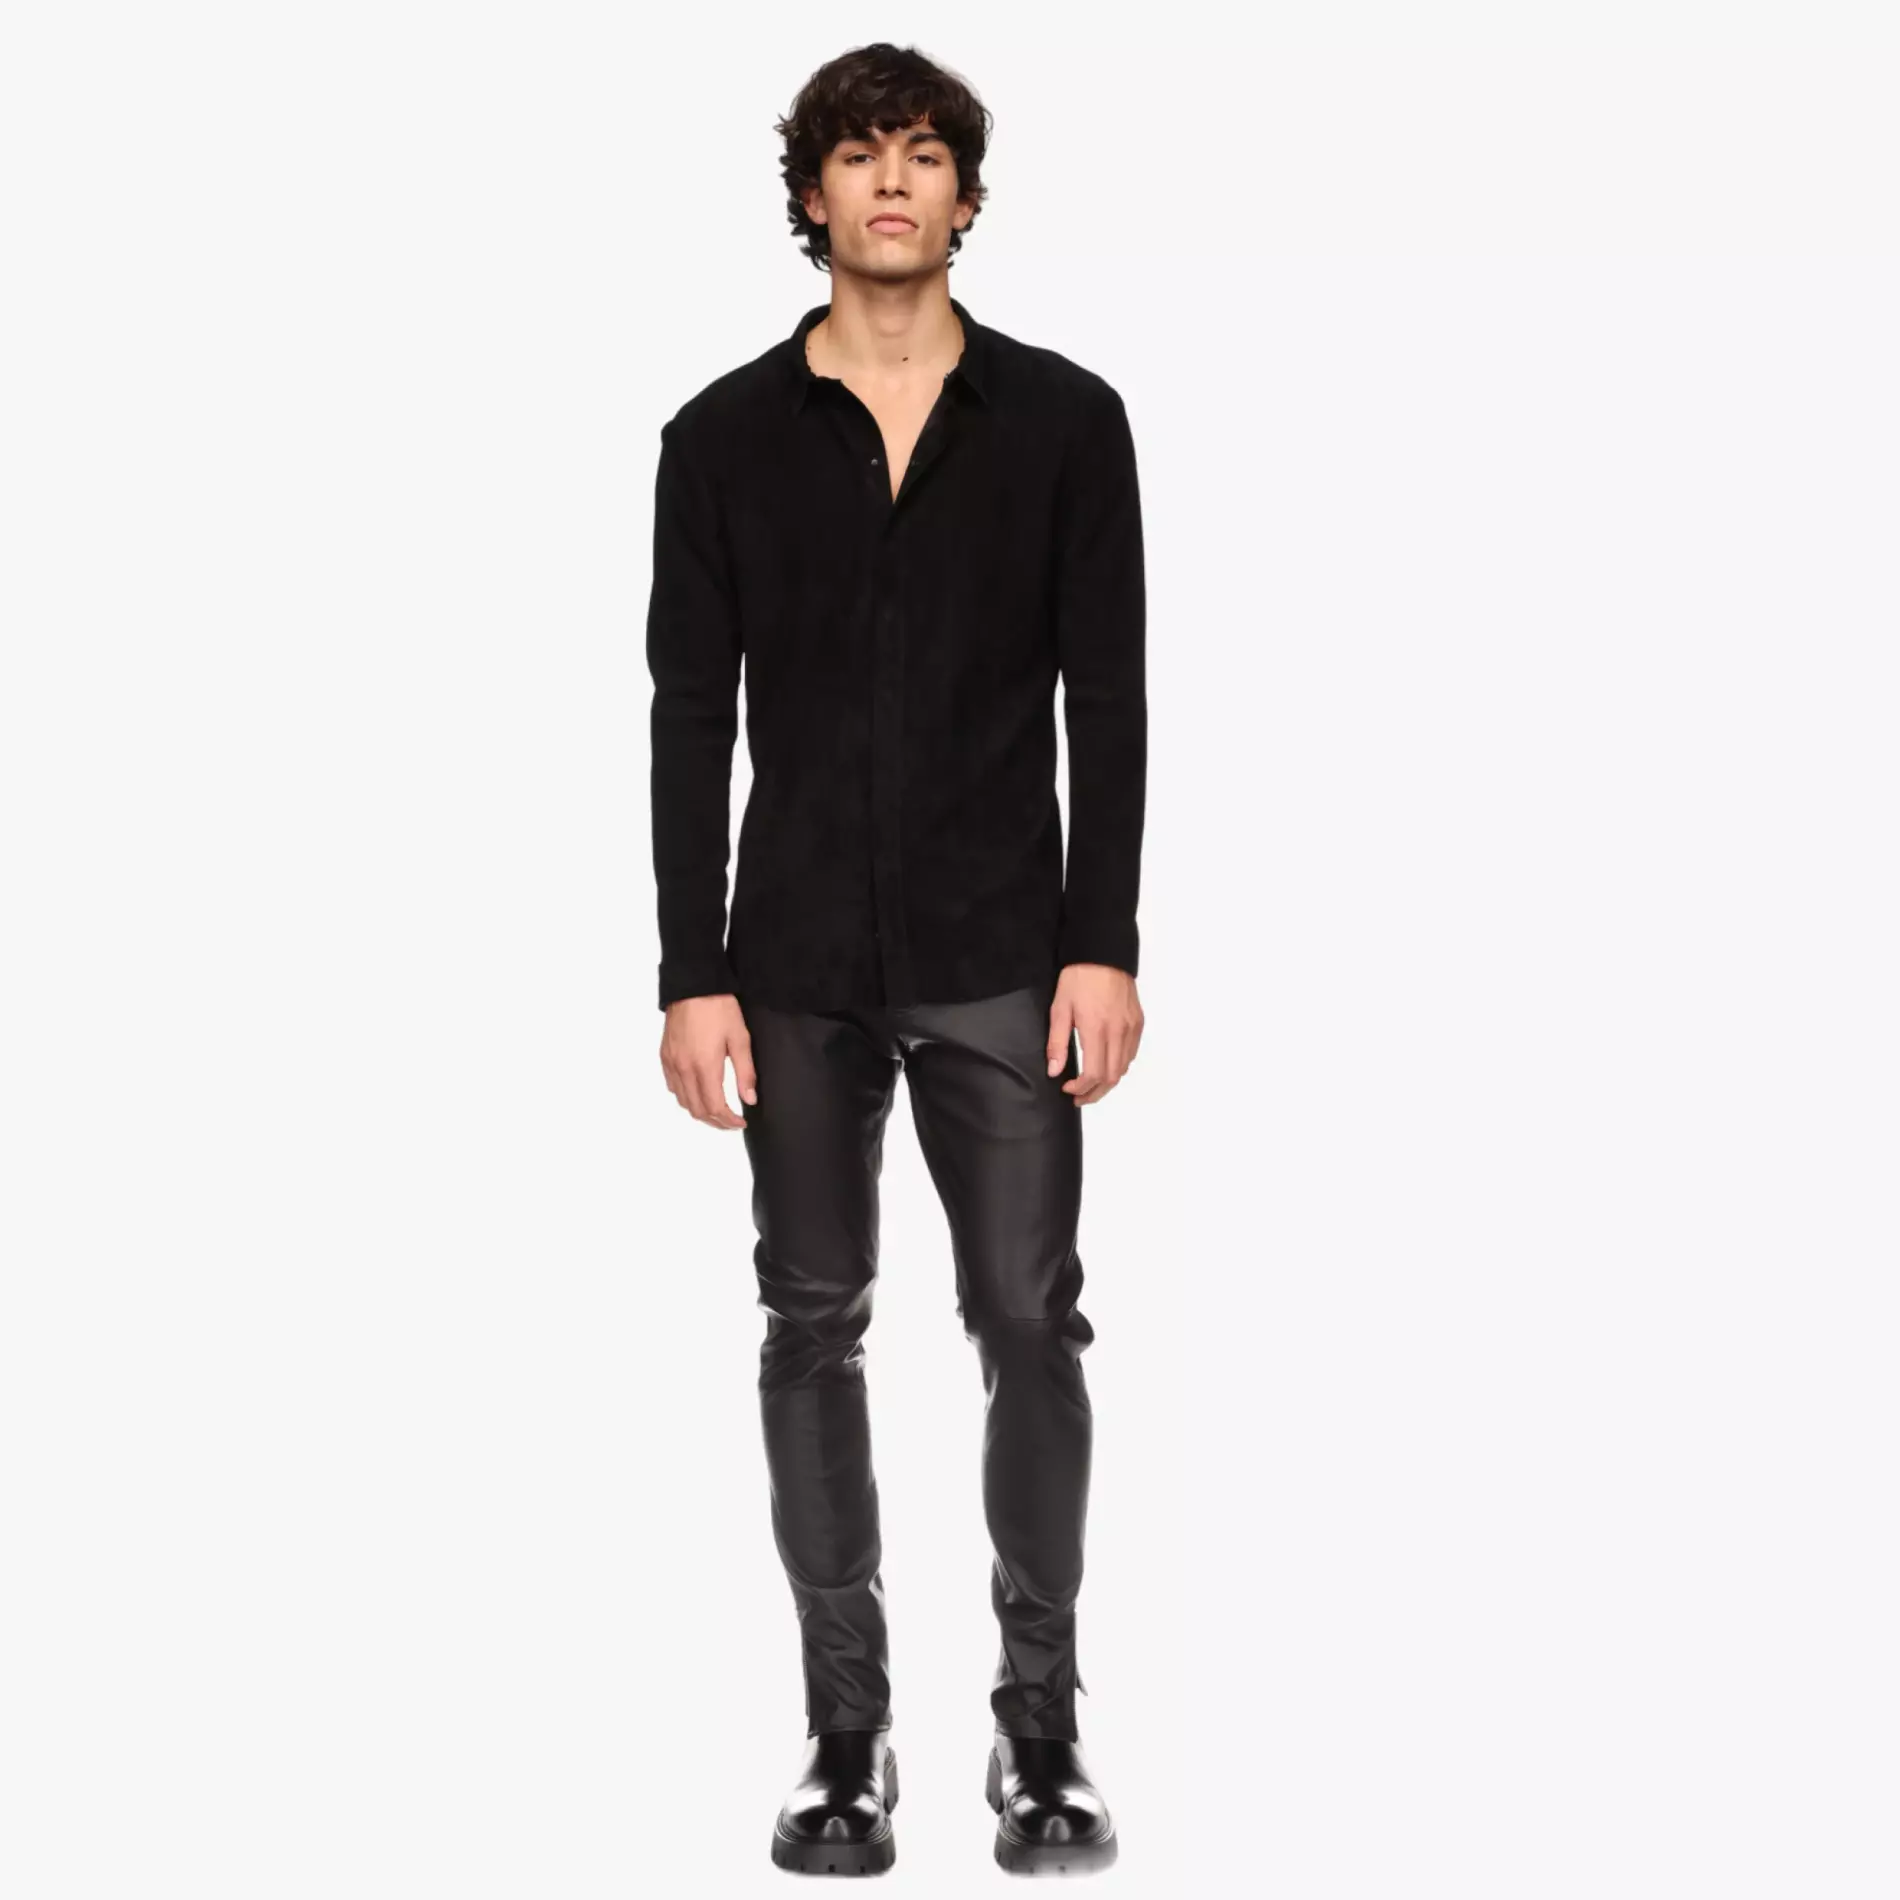 WANDER shirt in black stretch suede - front view